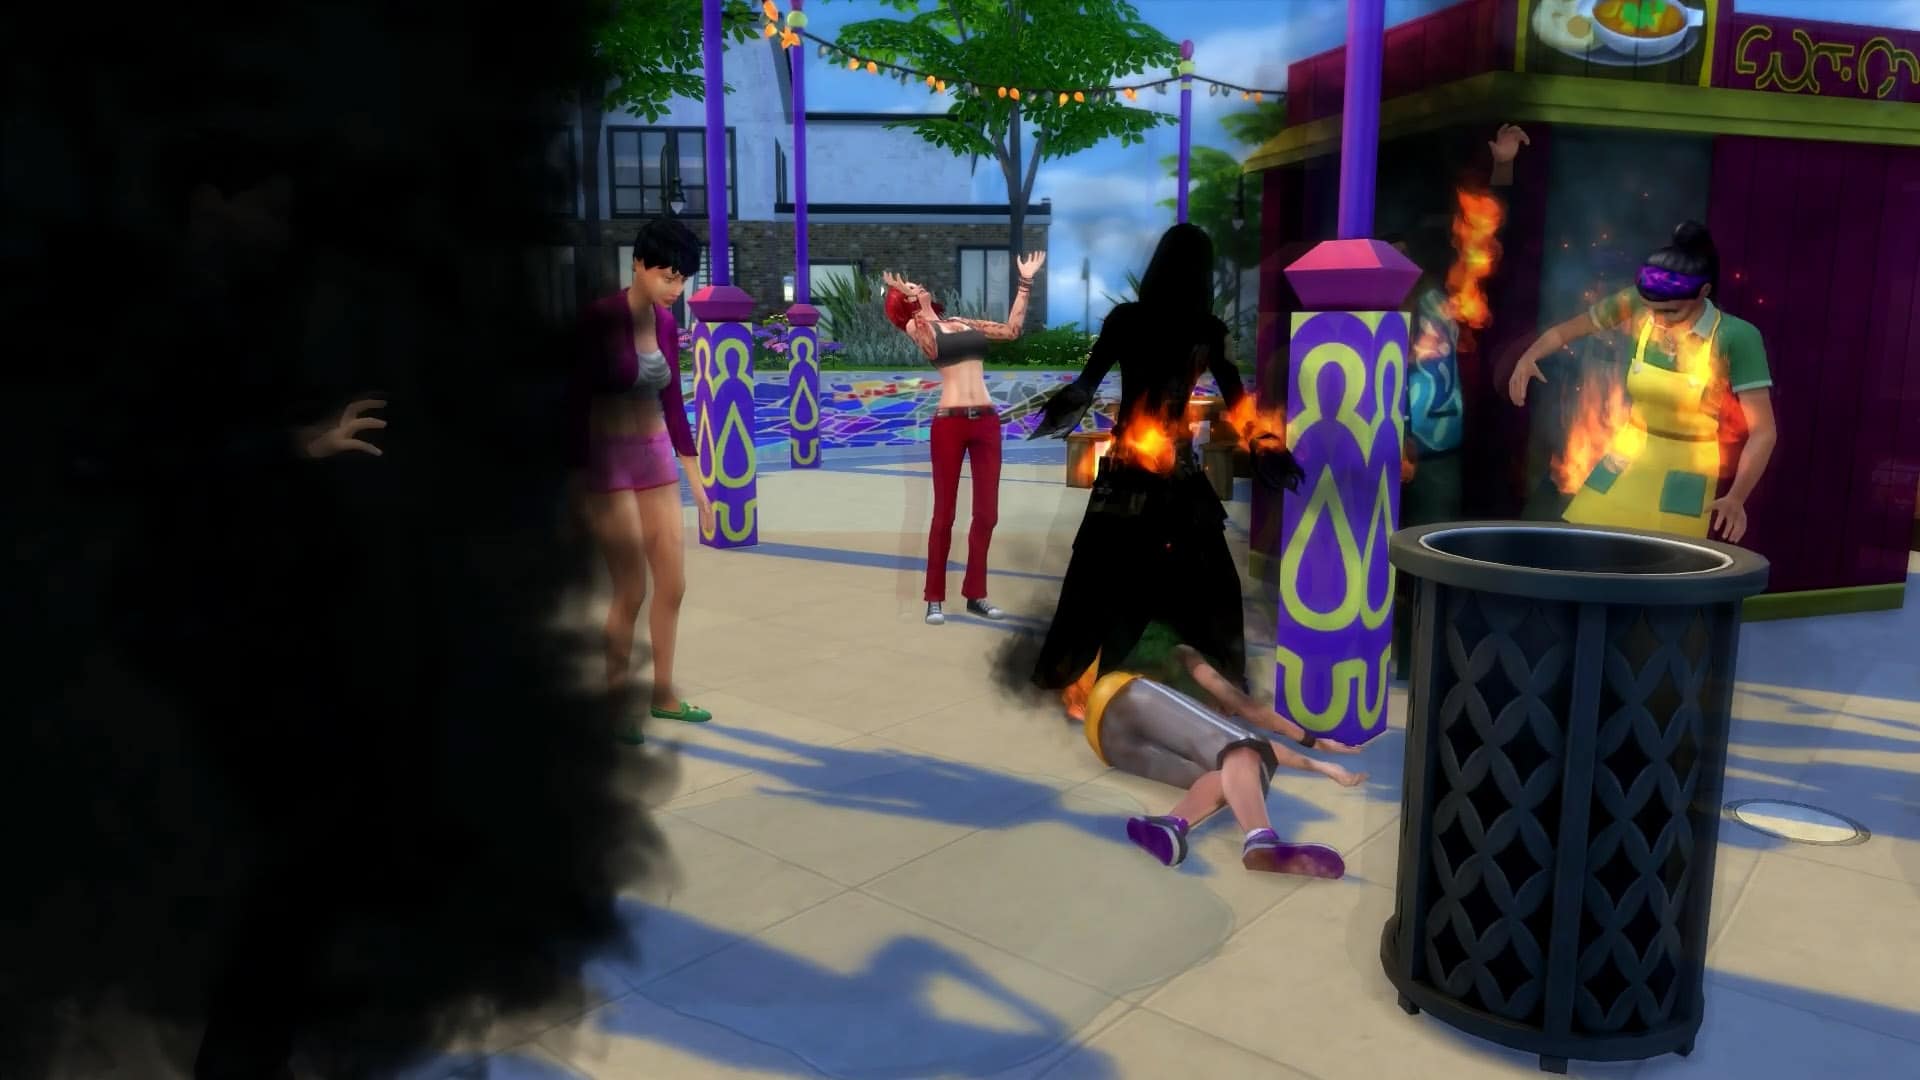 suicide mod the sims 4